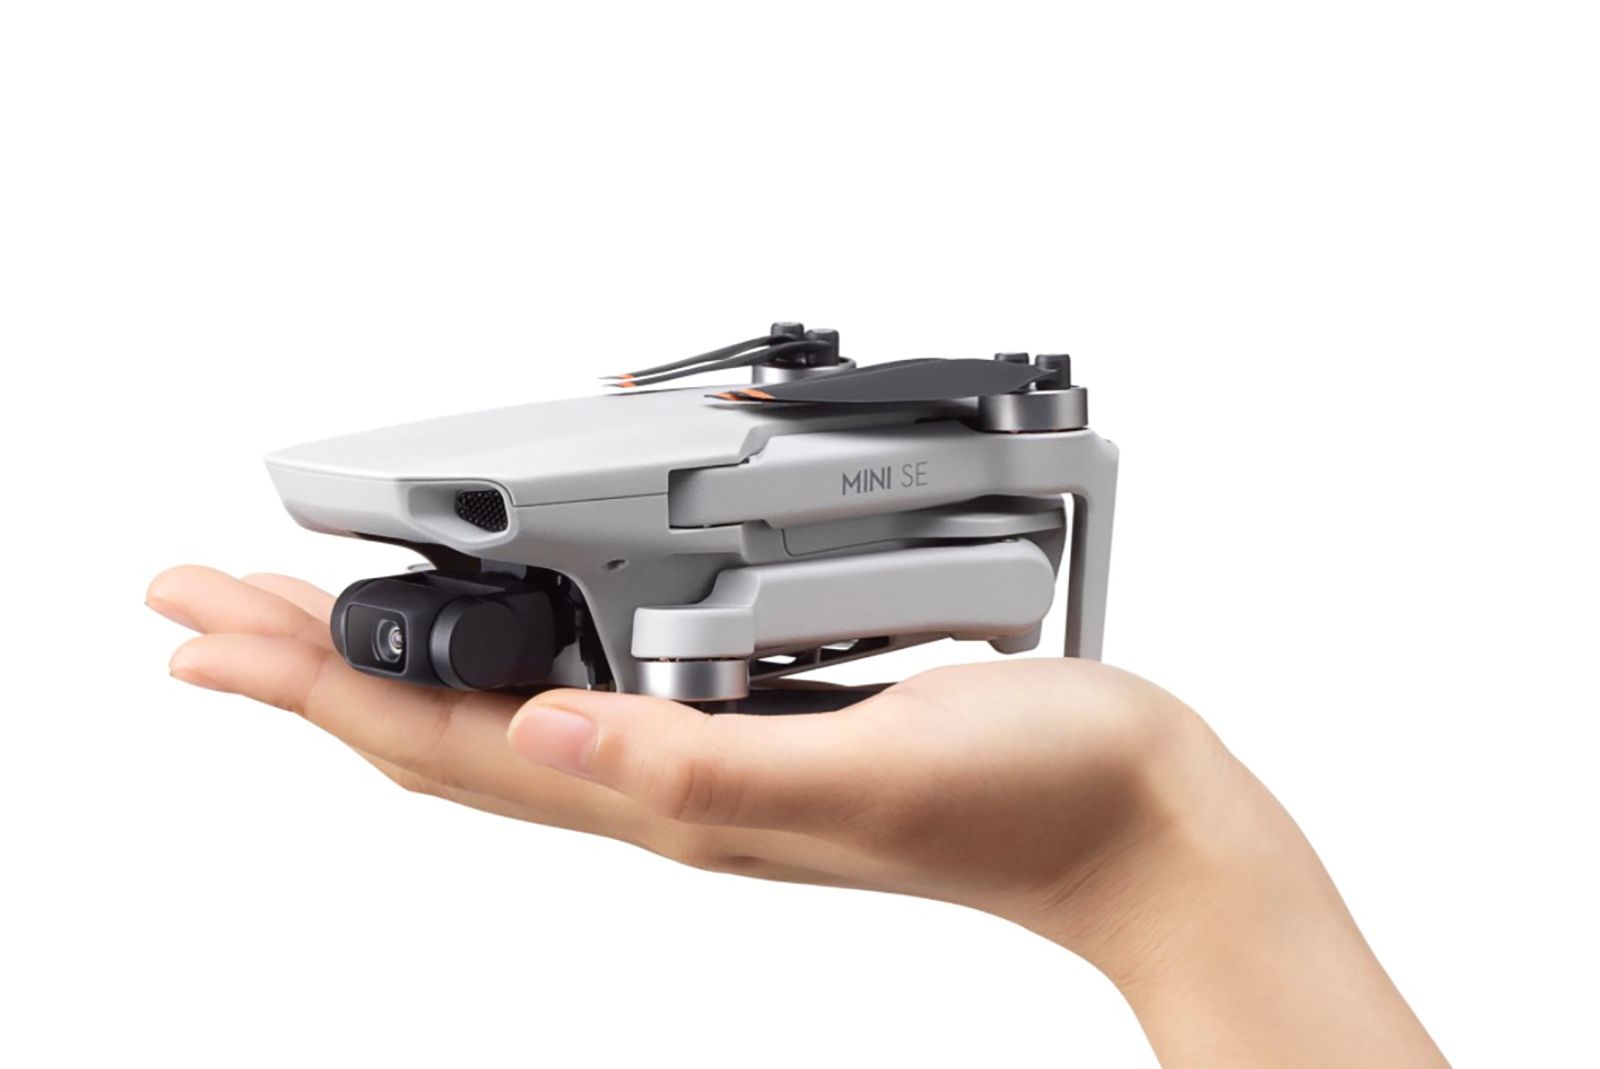 You can now buy DJI’s leaked $300 Mini SE drone photo 1